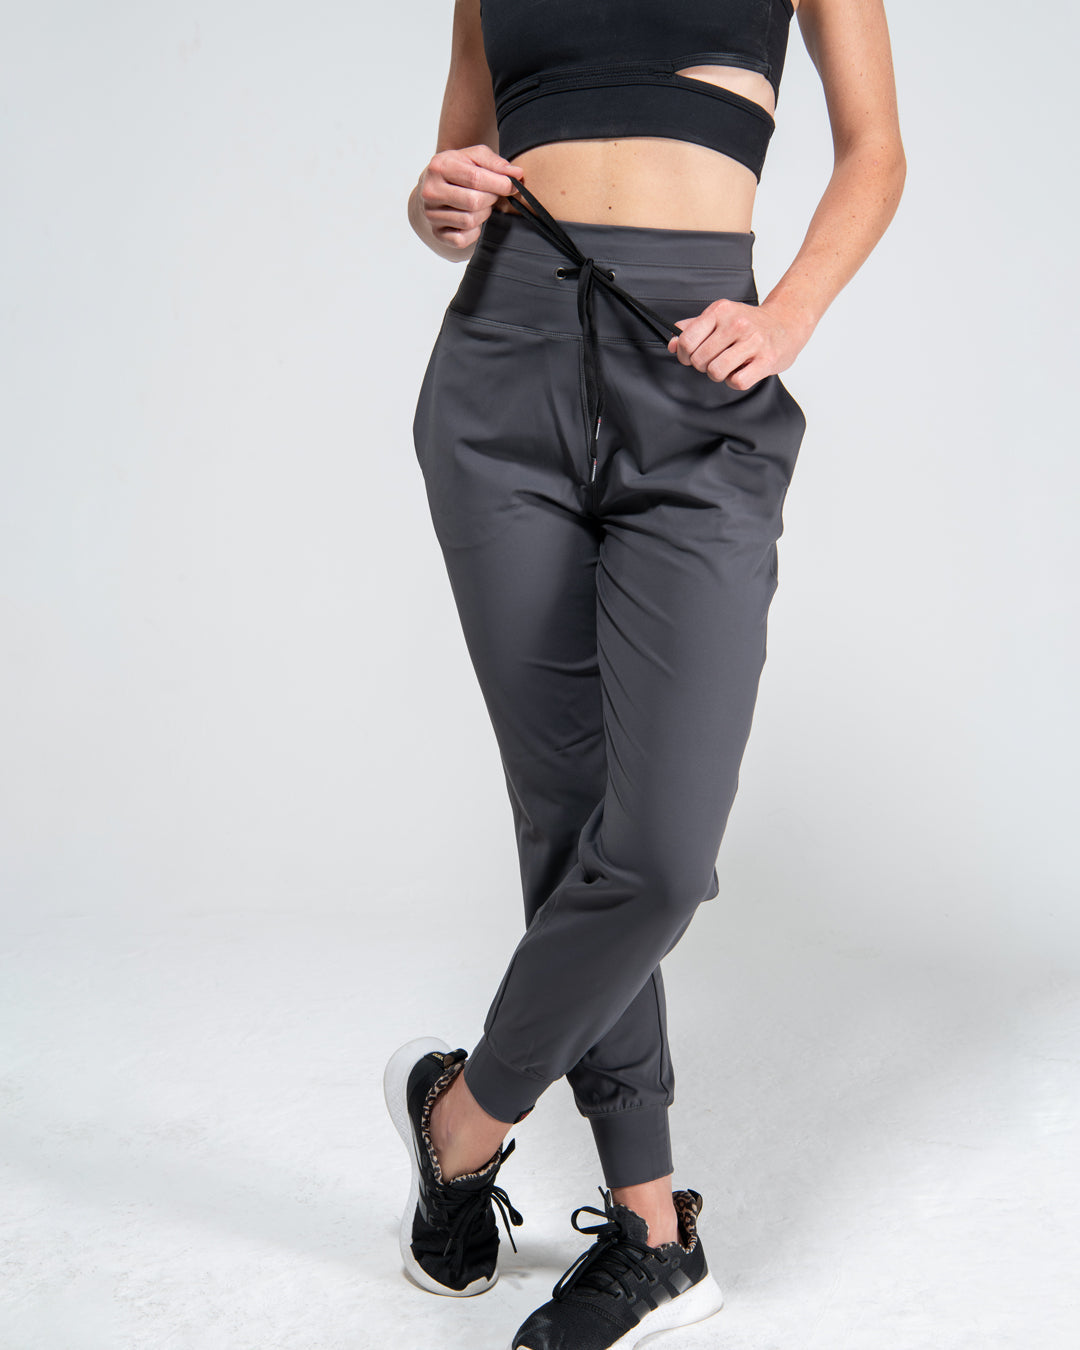 Kadyluxe womens jogger in color gray. Tapered leg and premium activewear fabric.